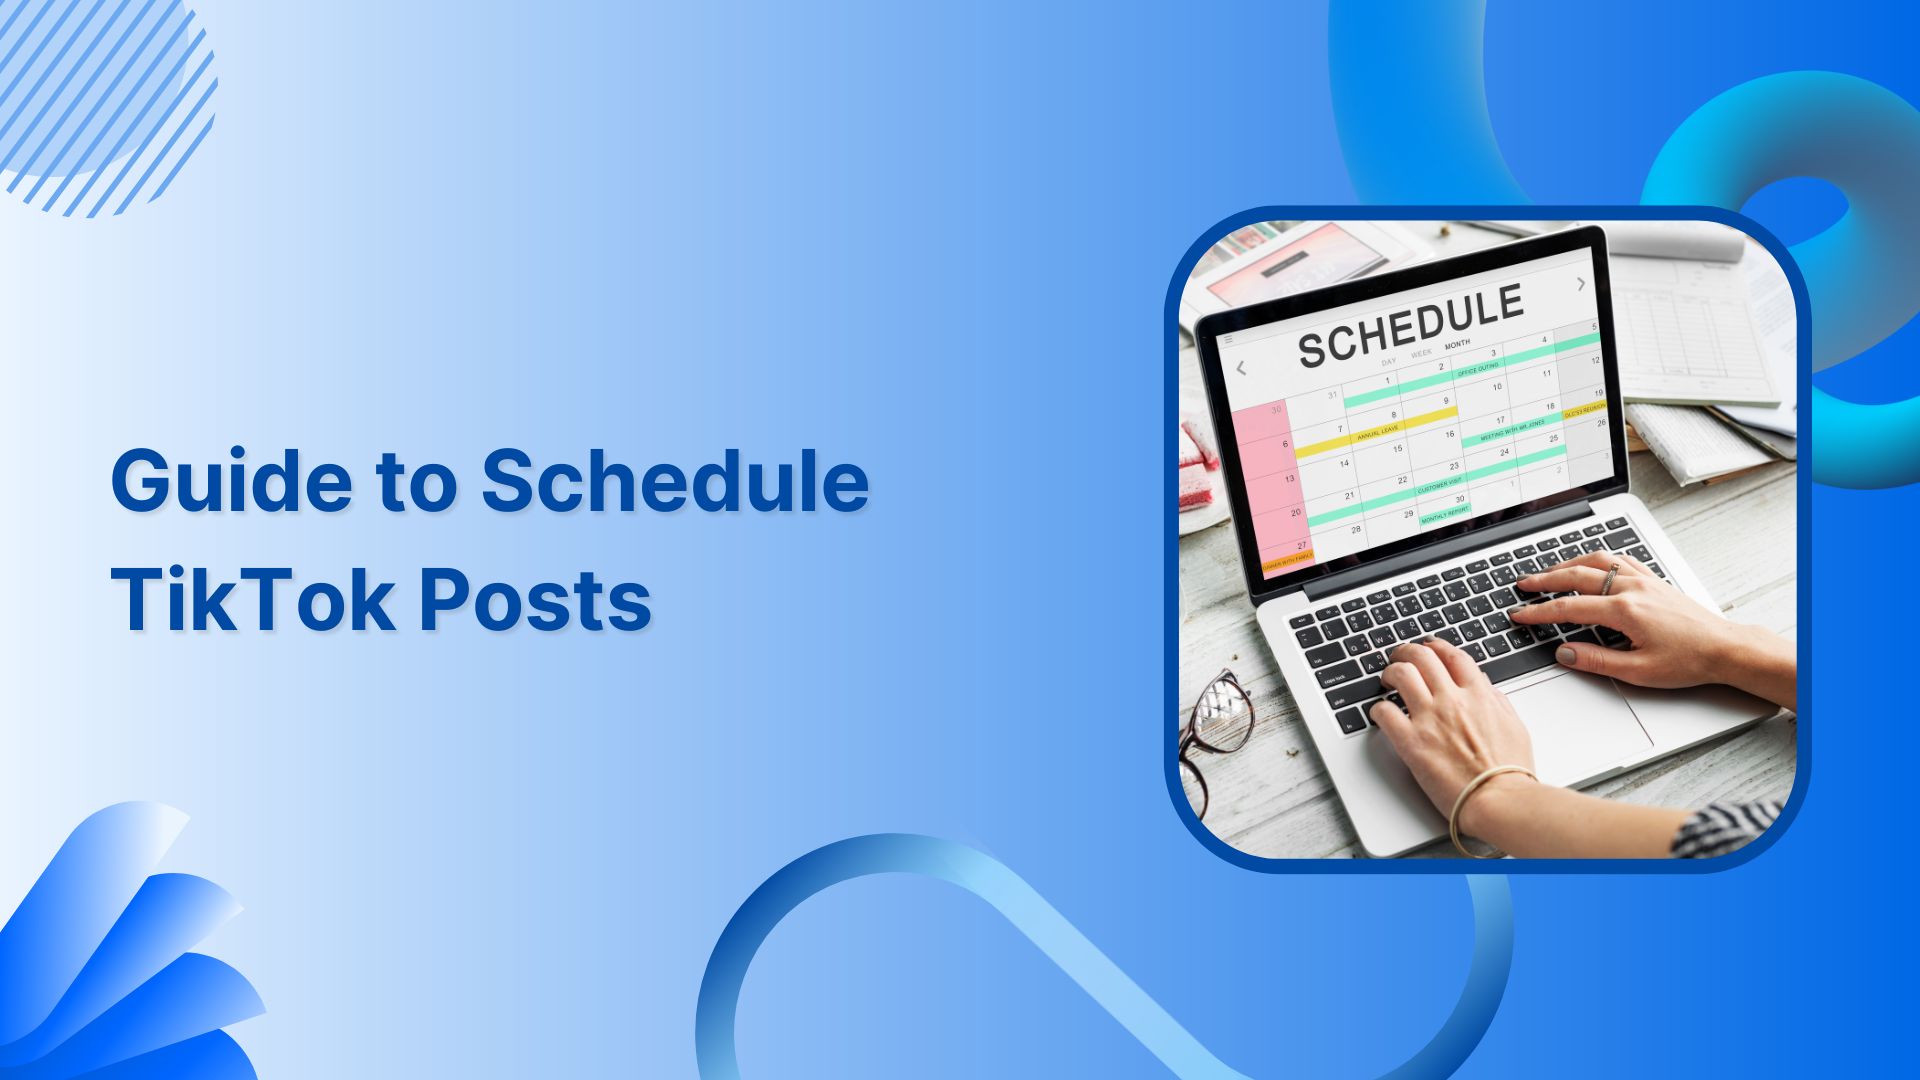 A Complete Guide to Schedule TikTok Posts in 2022